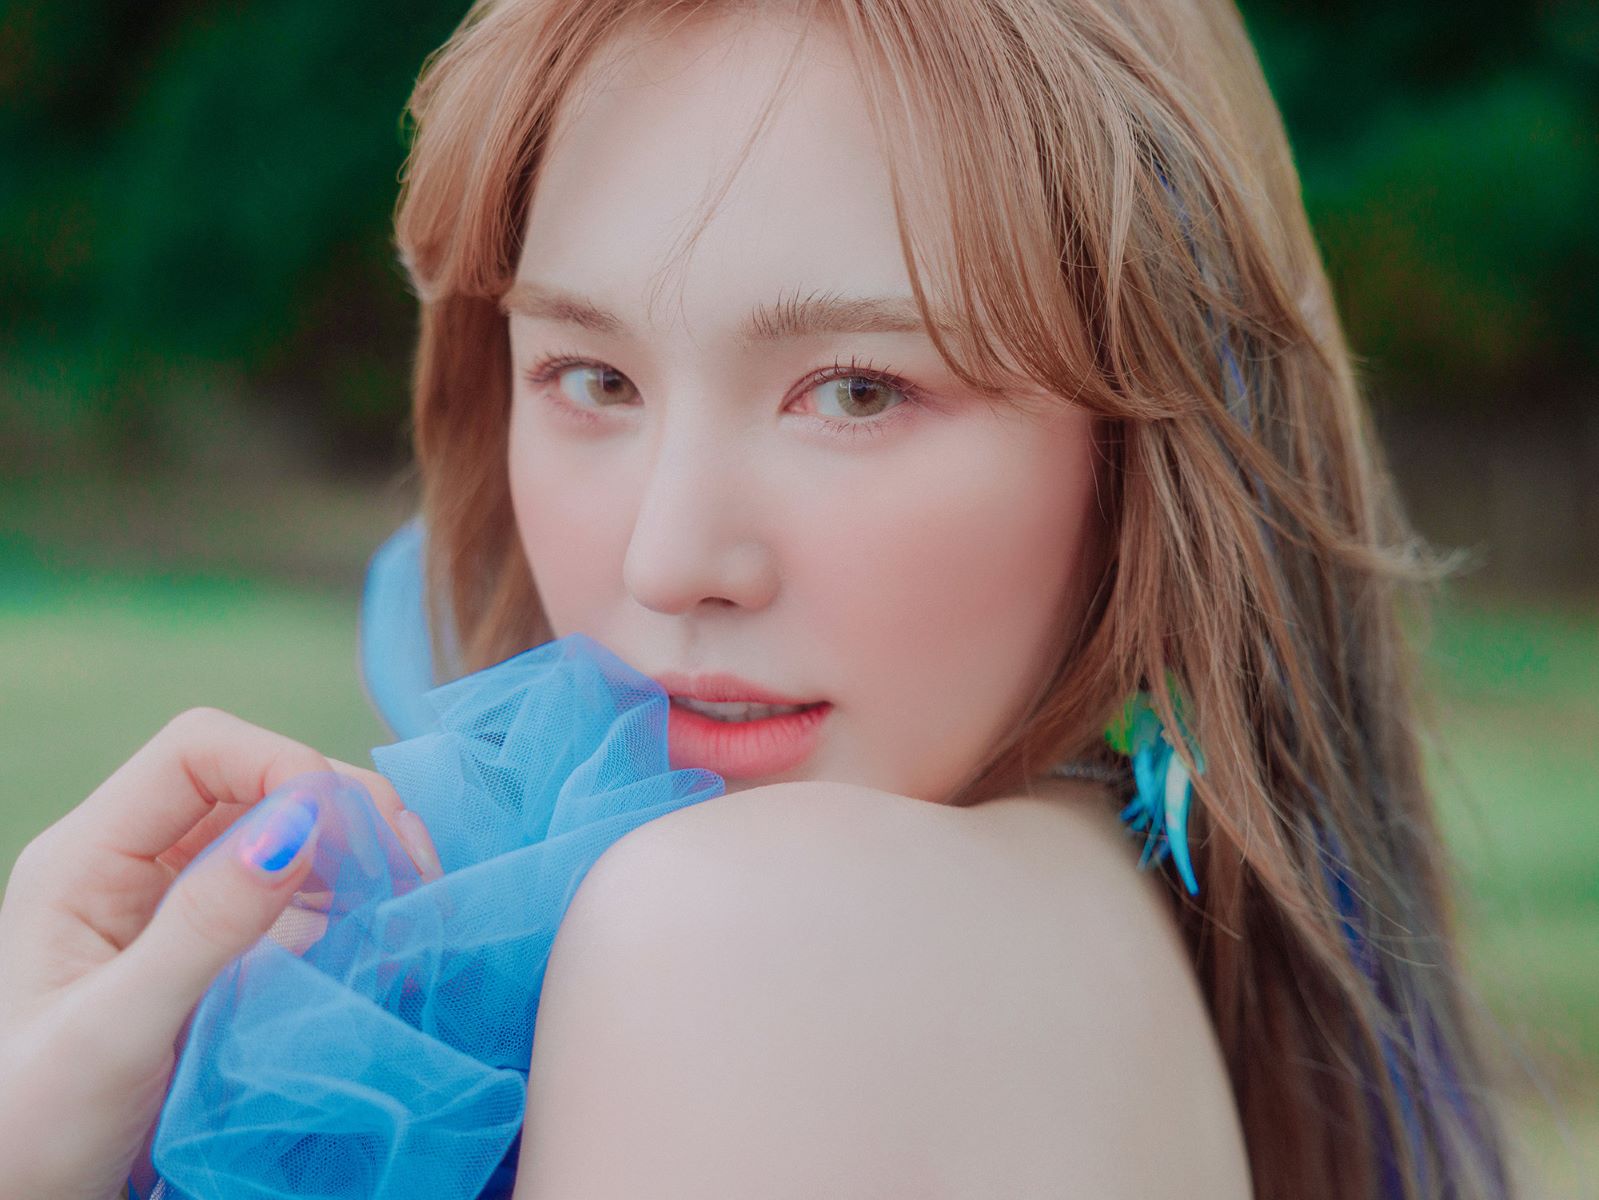 Red Velvet's Wendy's Shocking Transformation After Accident